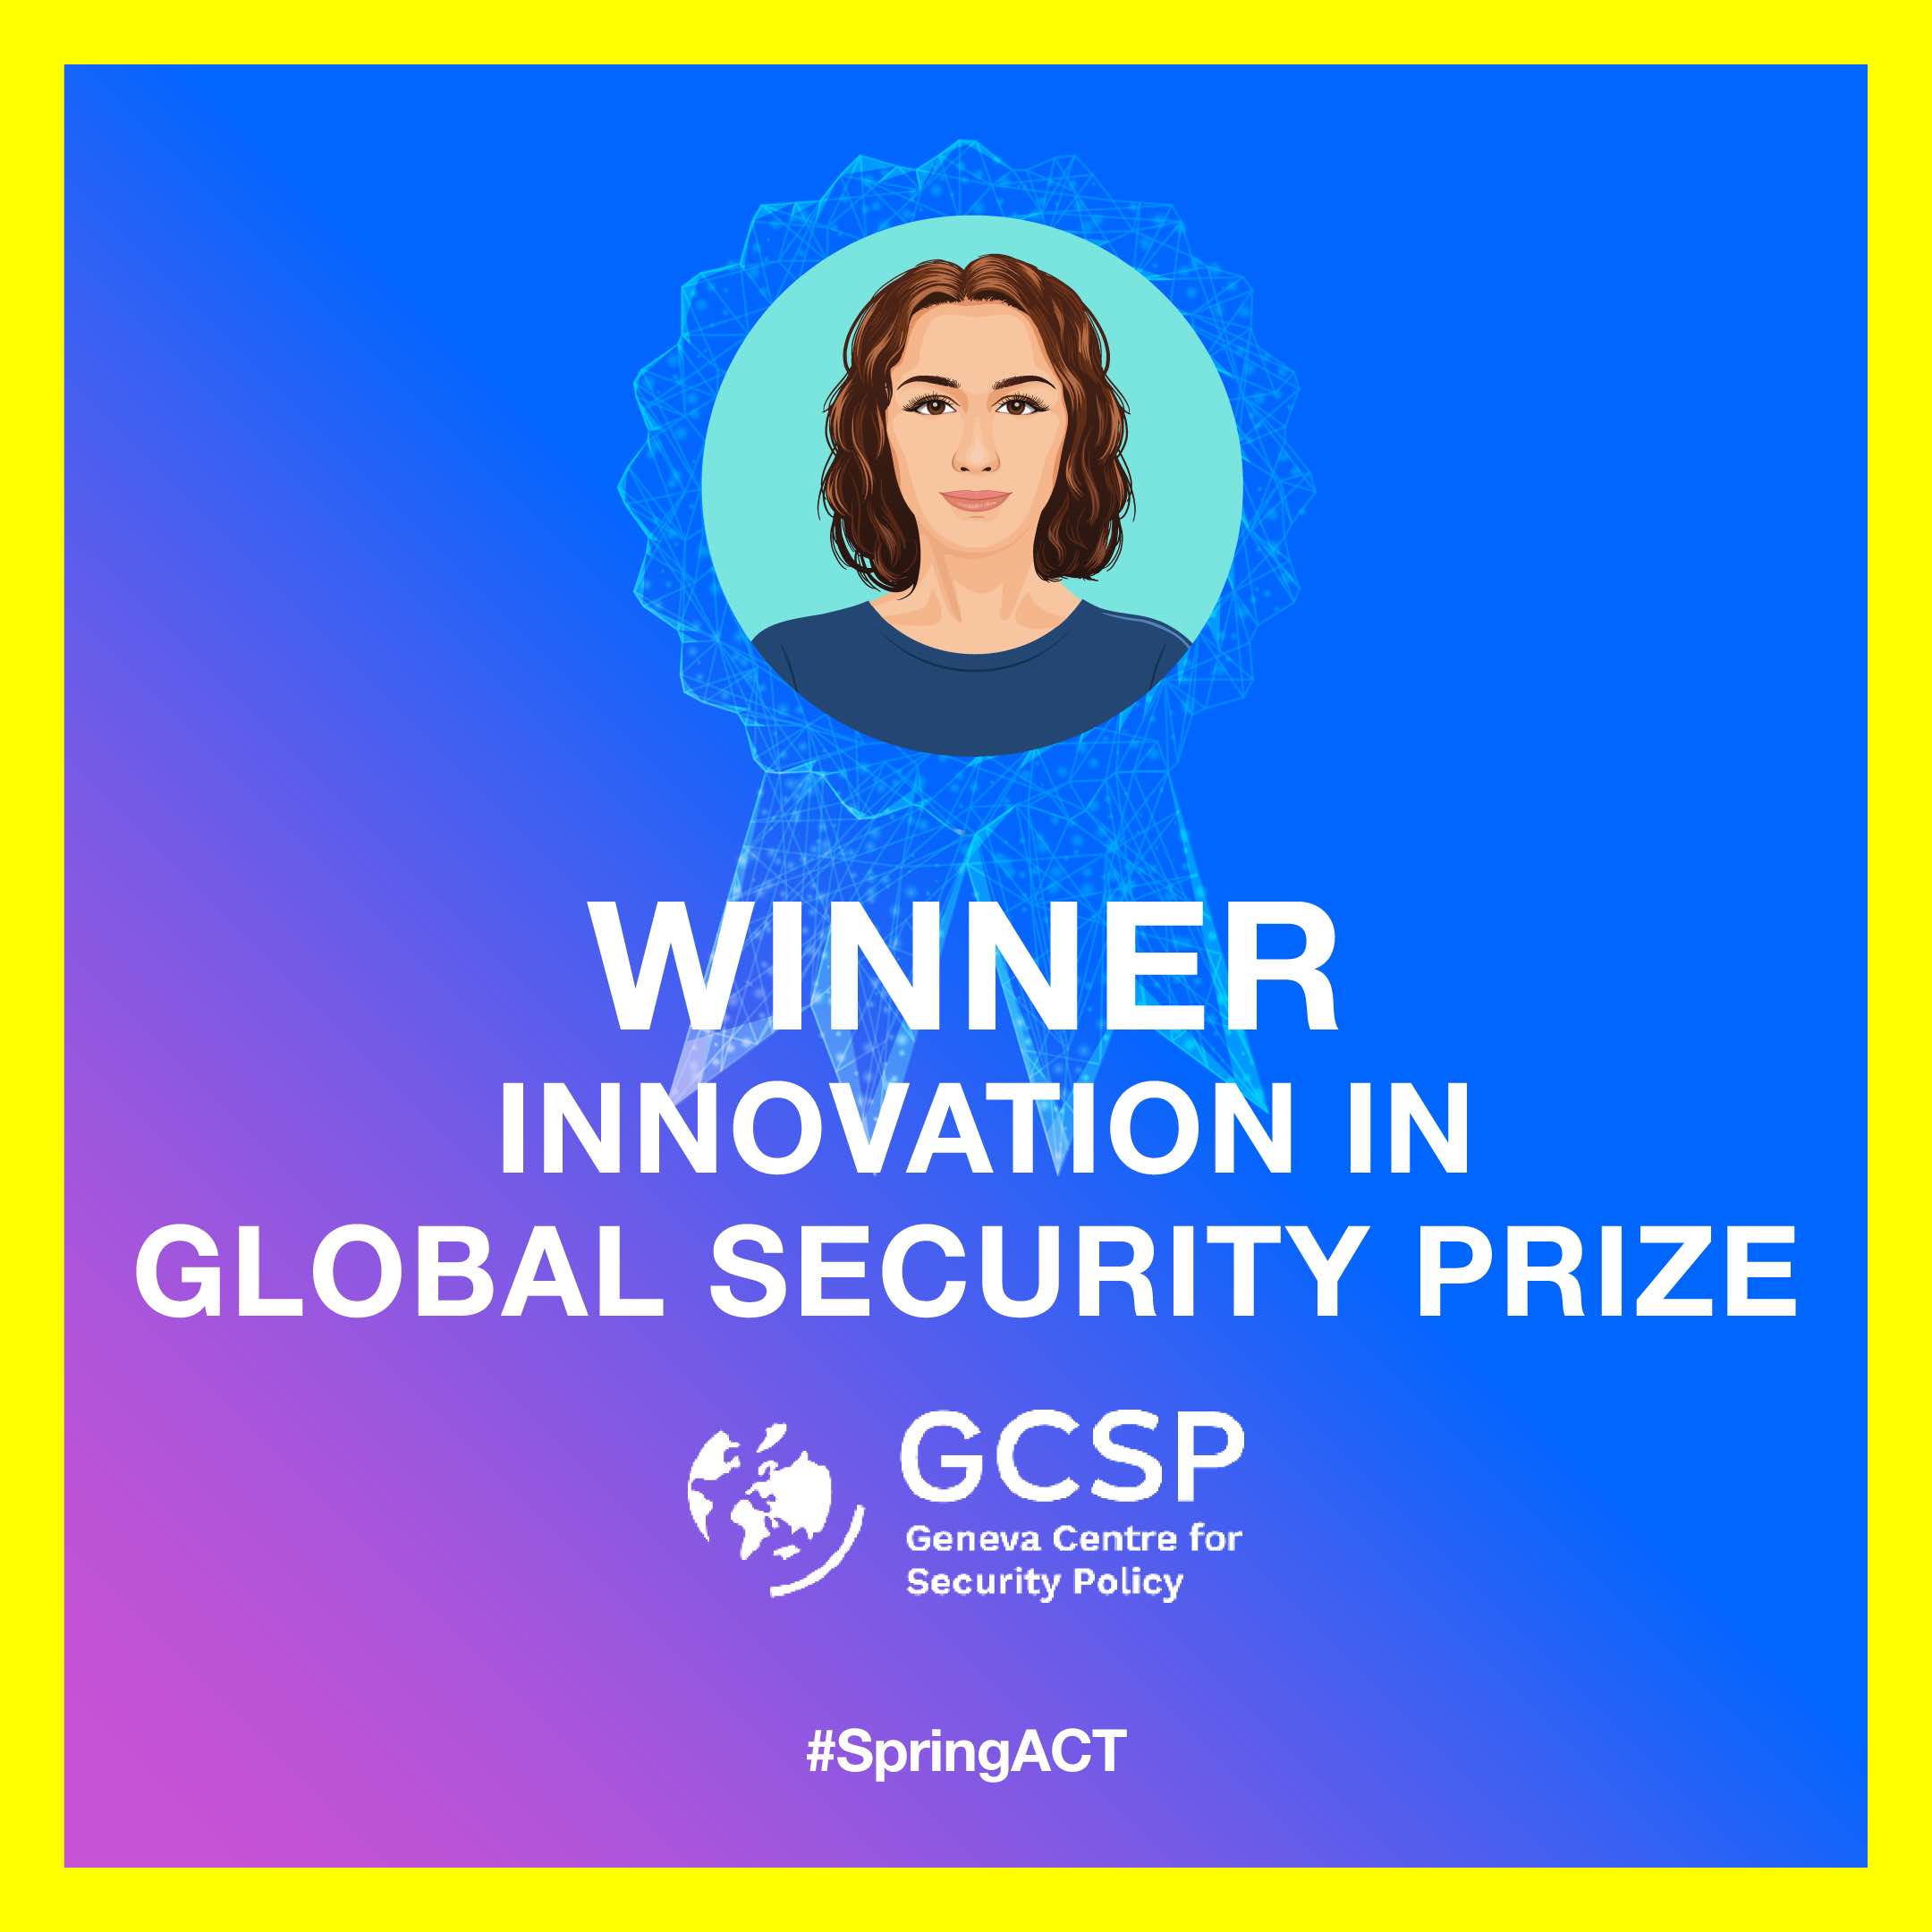 Prize for Innovation in Global Security!